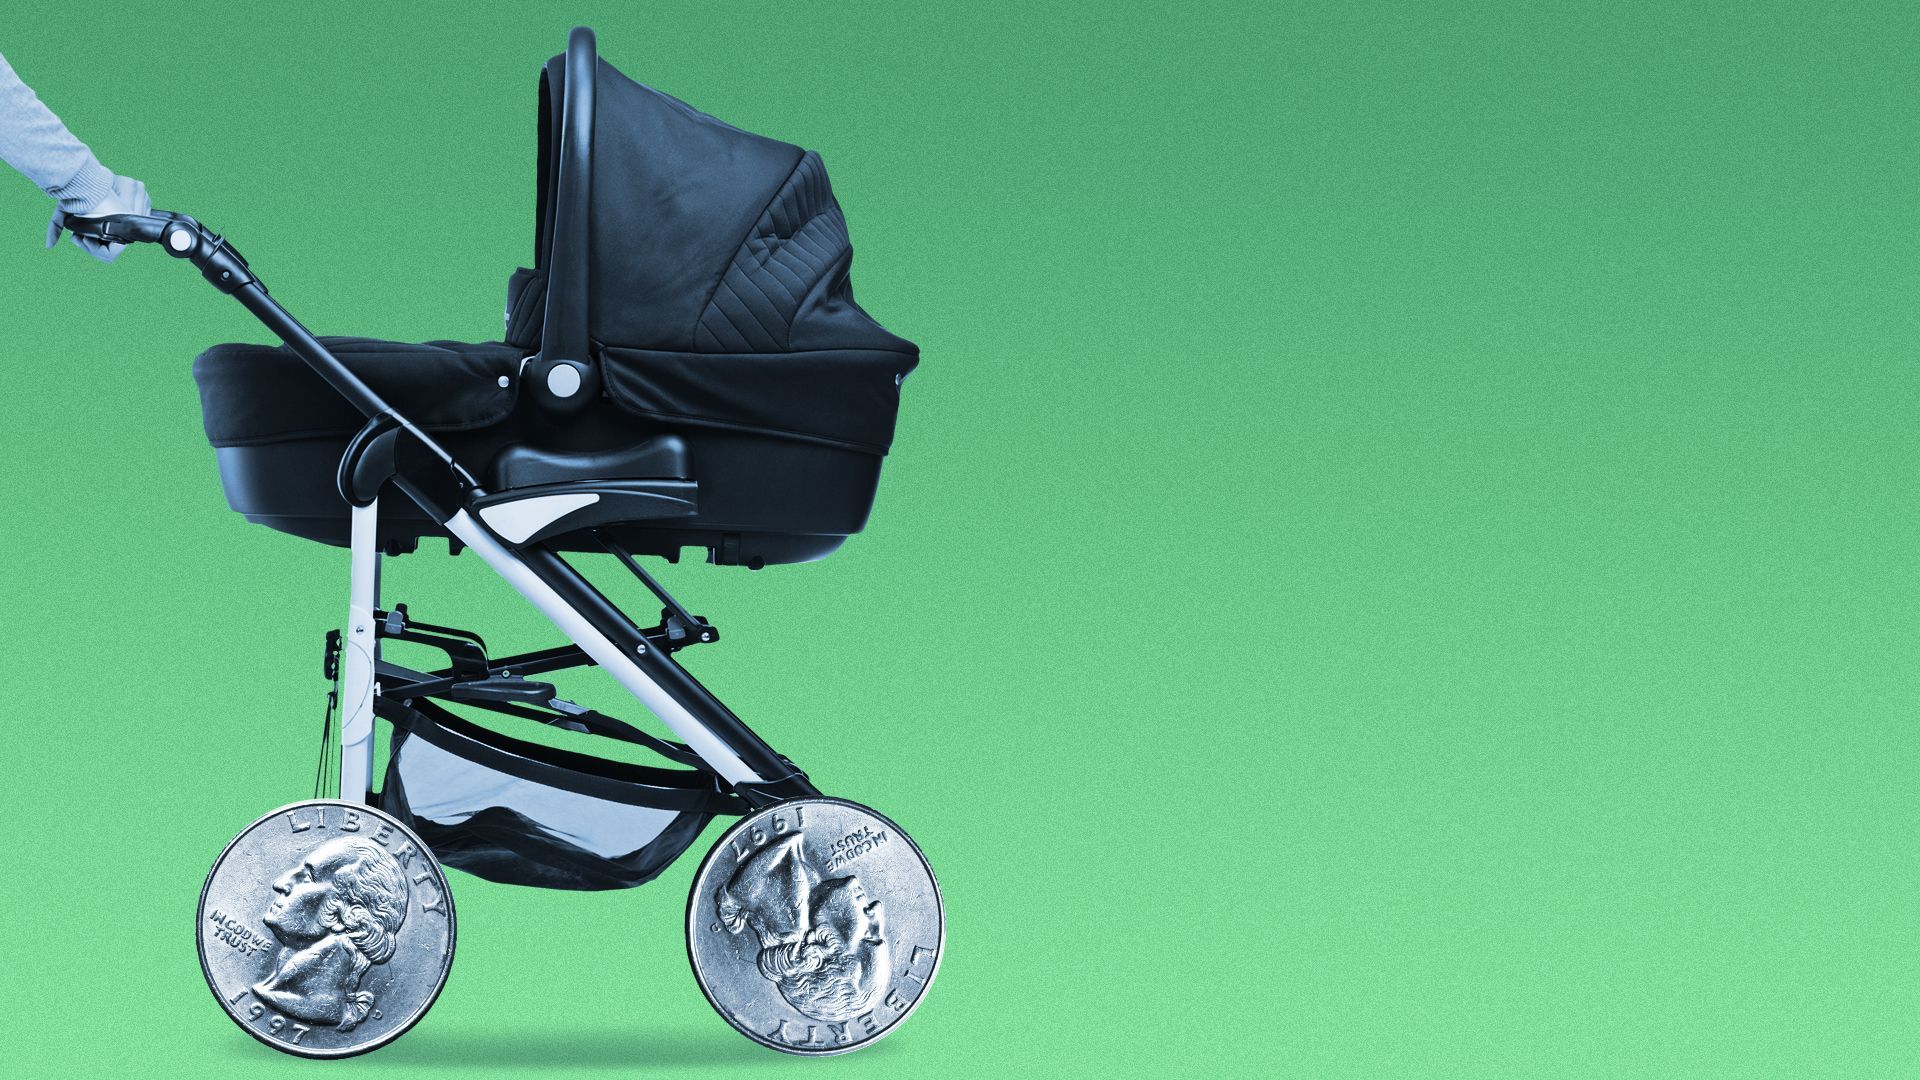 Illustration of a baby stroller with quarters for wheels.